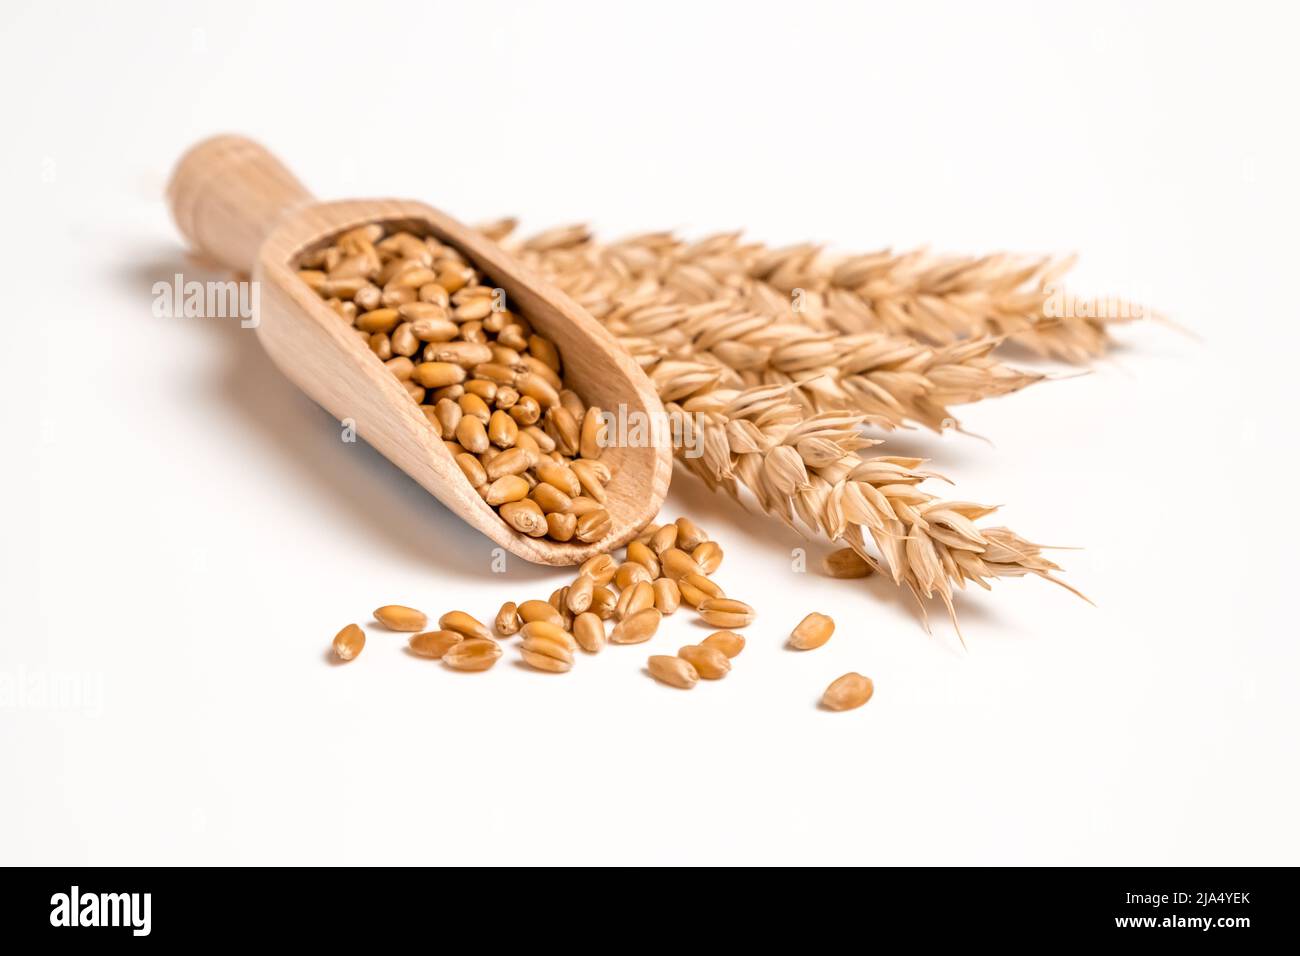 Wheat grain in wooden scoop and bundle of wheat spikes isolated on white. Concept of food supply, vegetarian diet, carbs and nutrients Stock Photo